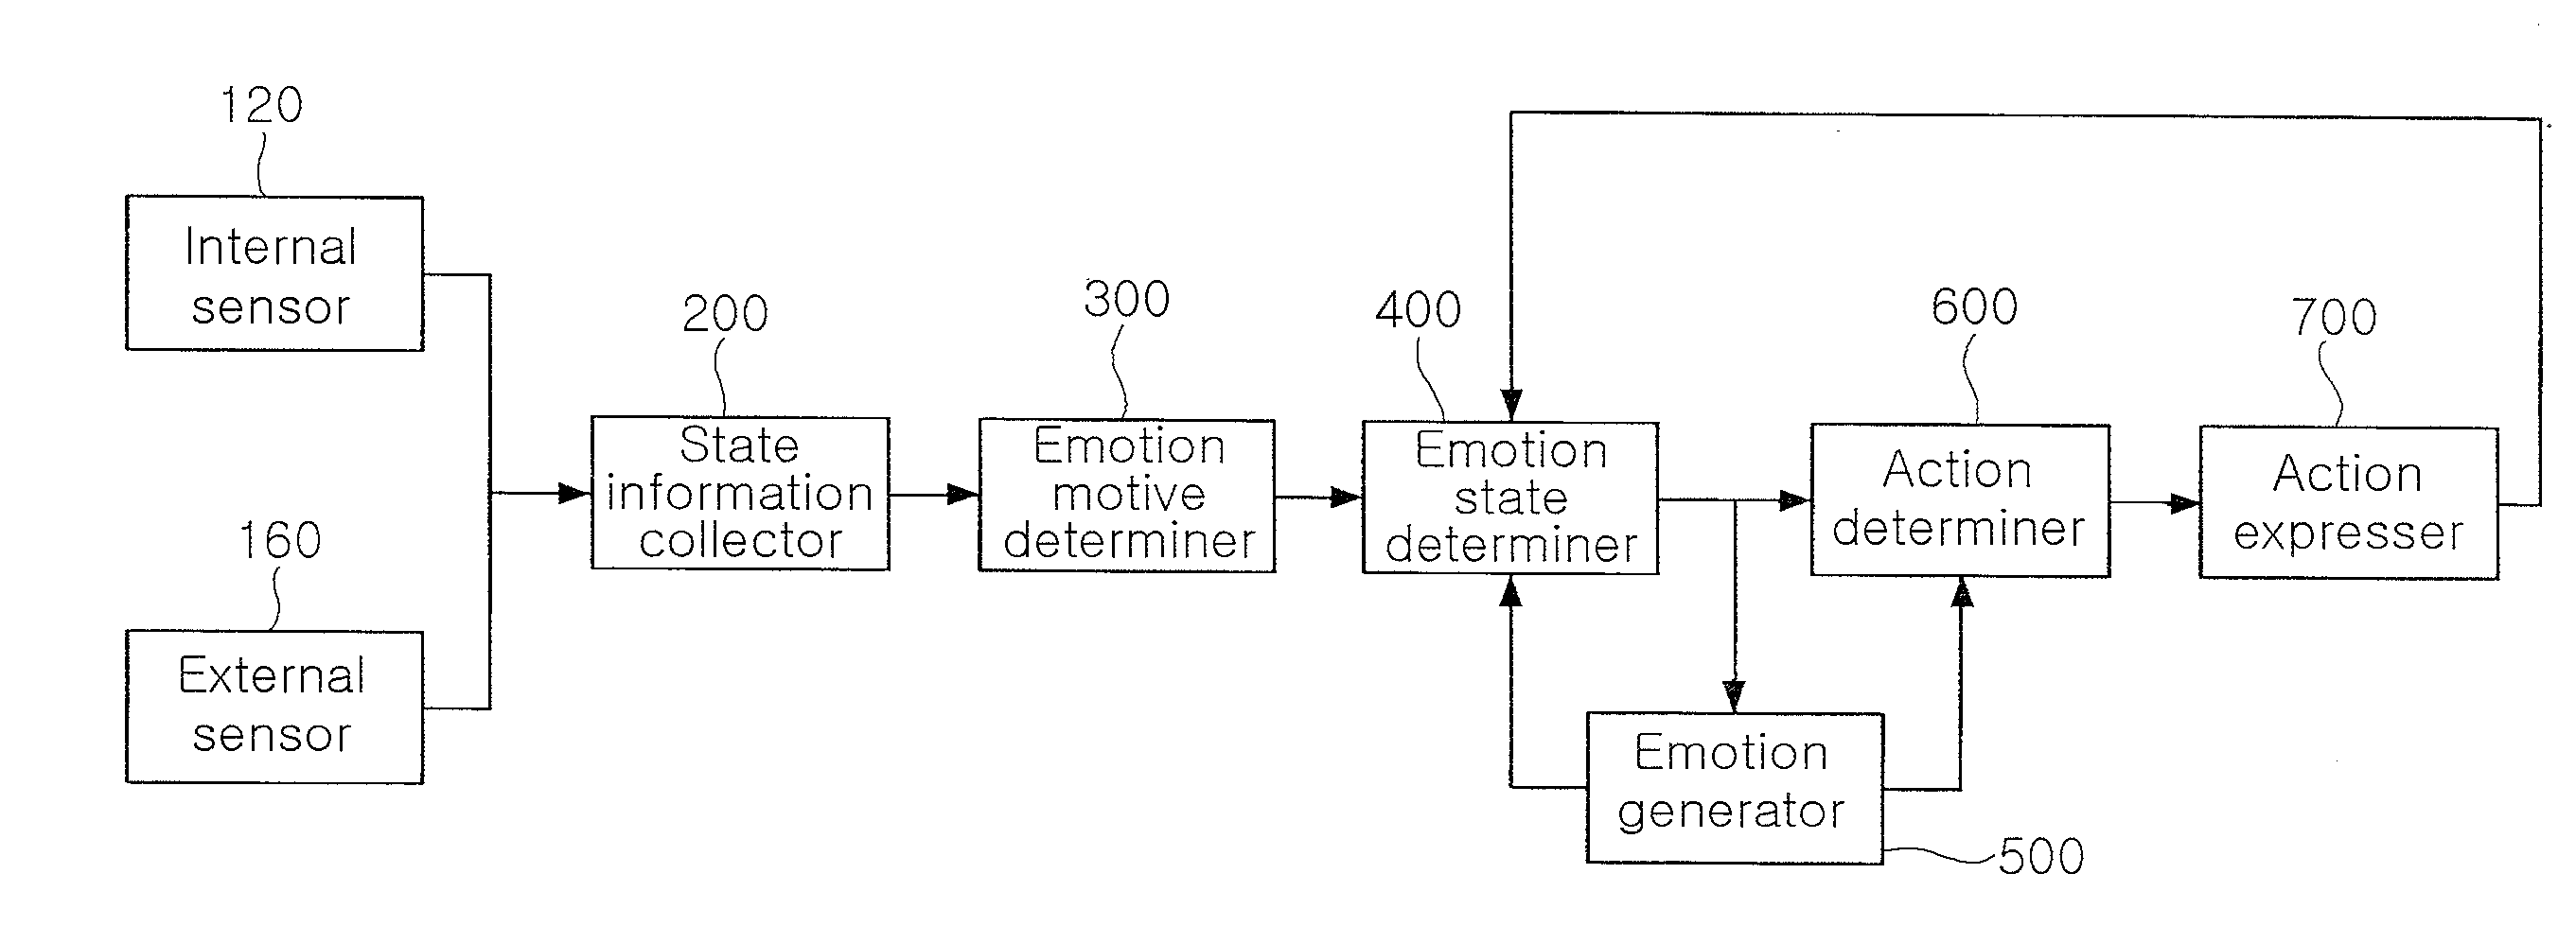 Apparatus and method for expressing emotions in intelligent robot by using state information